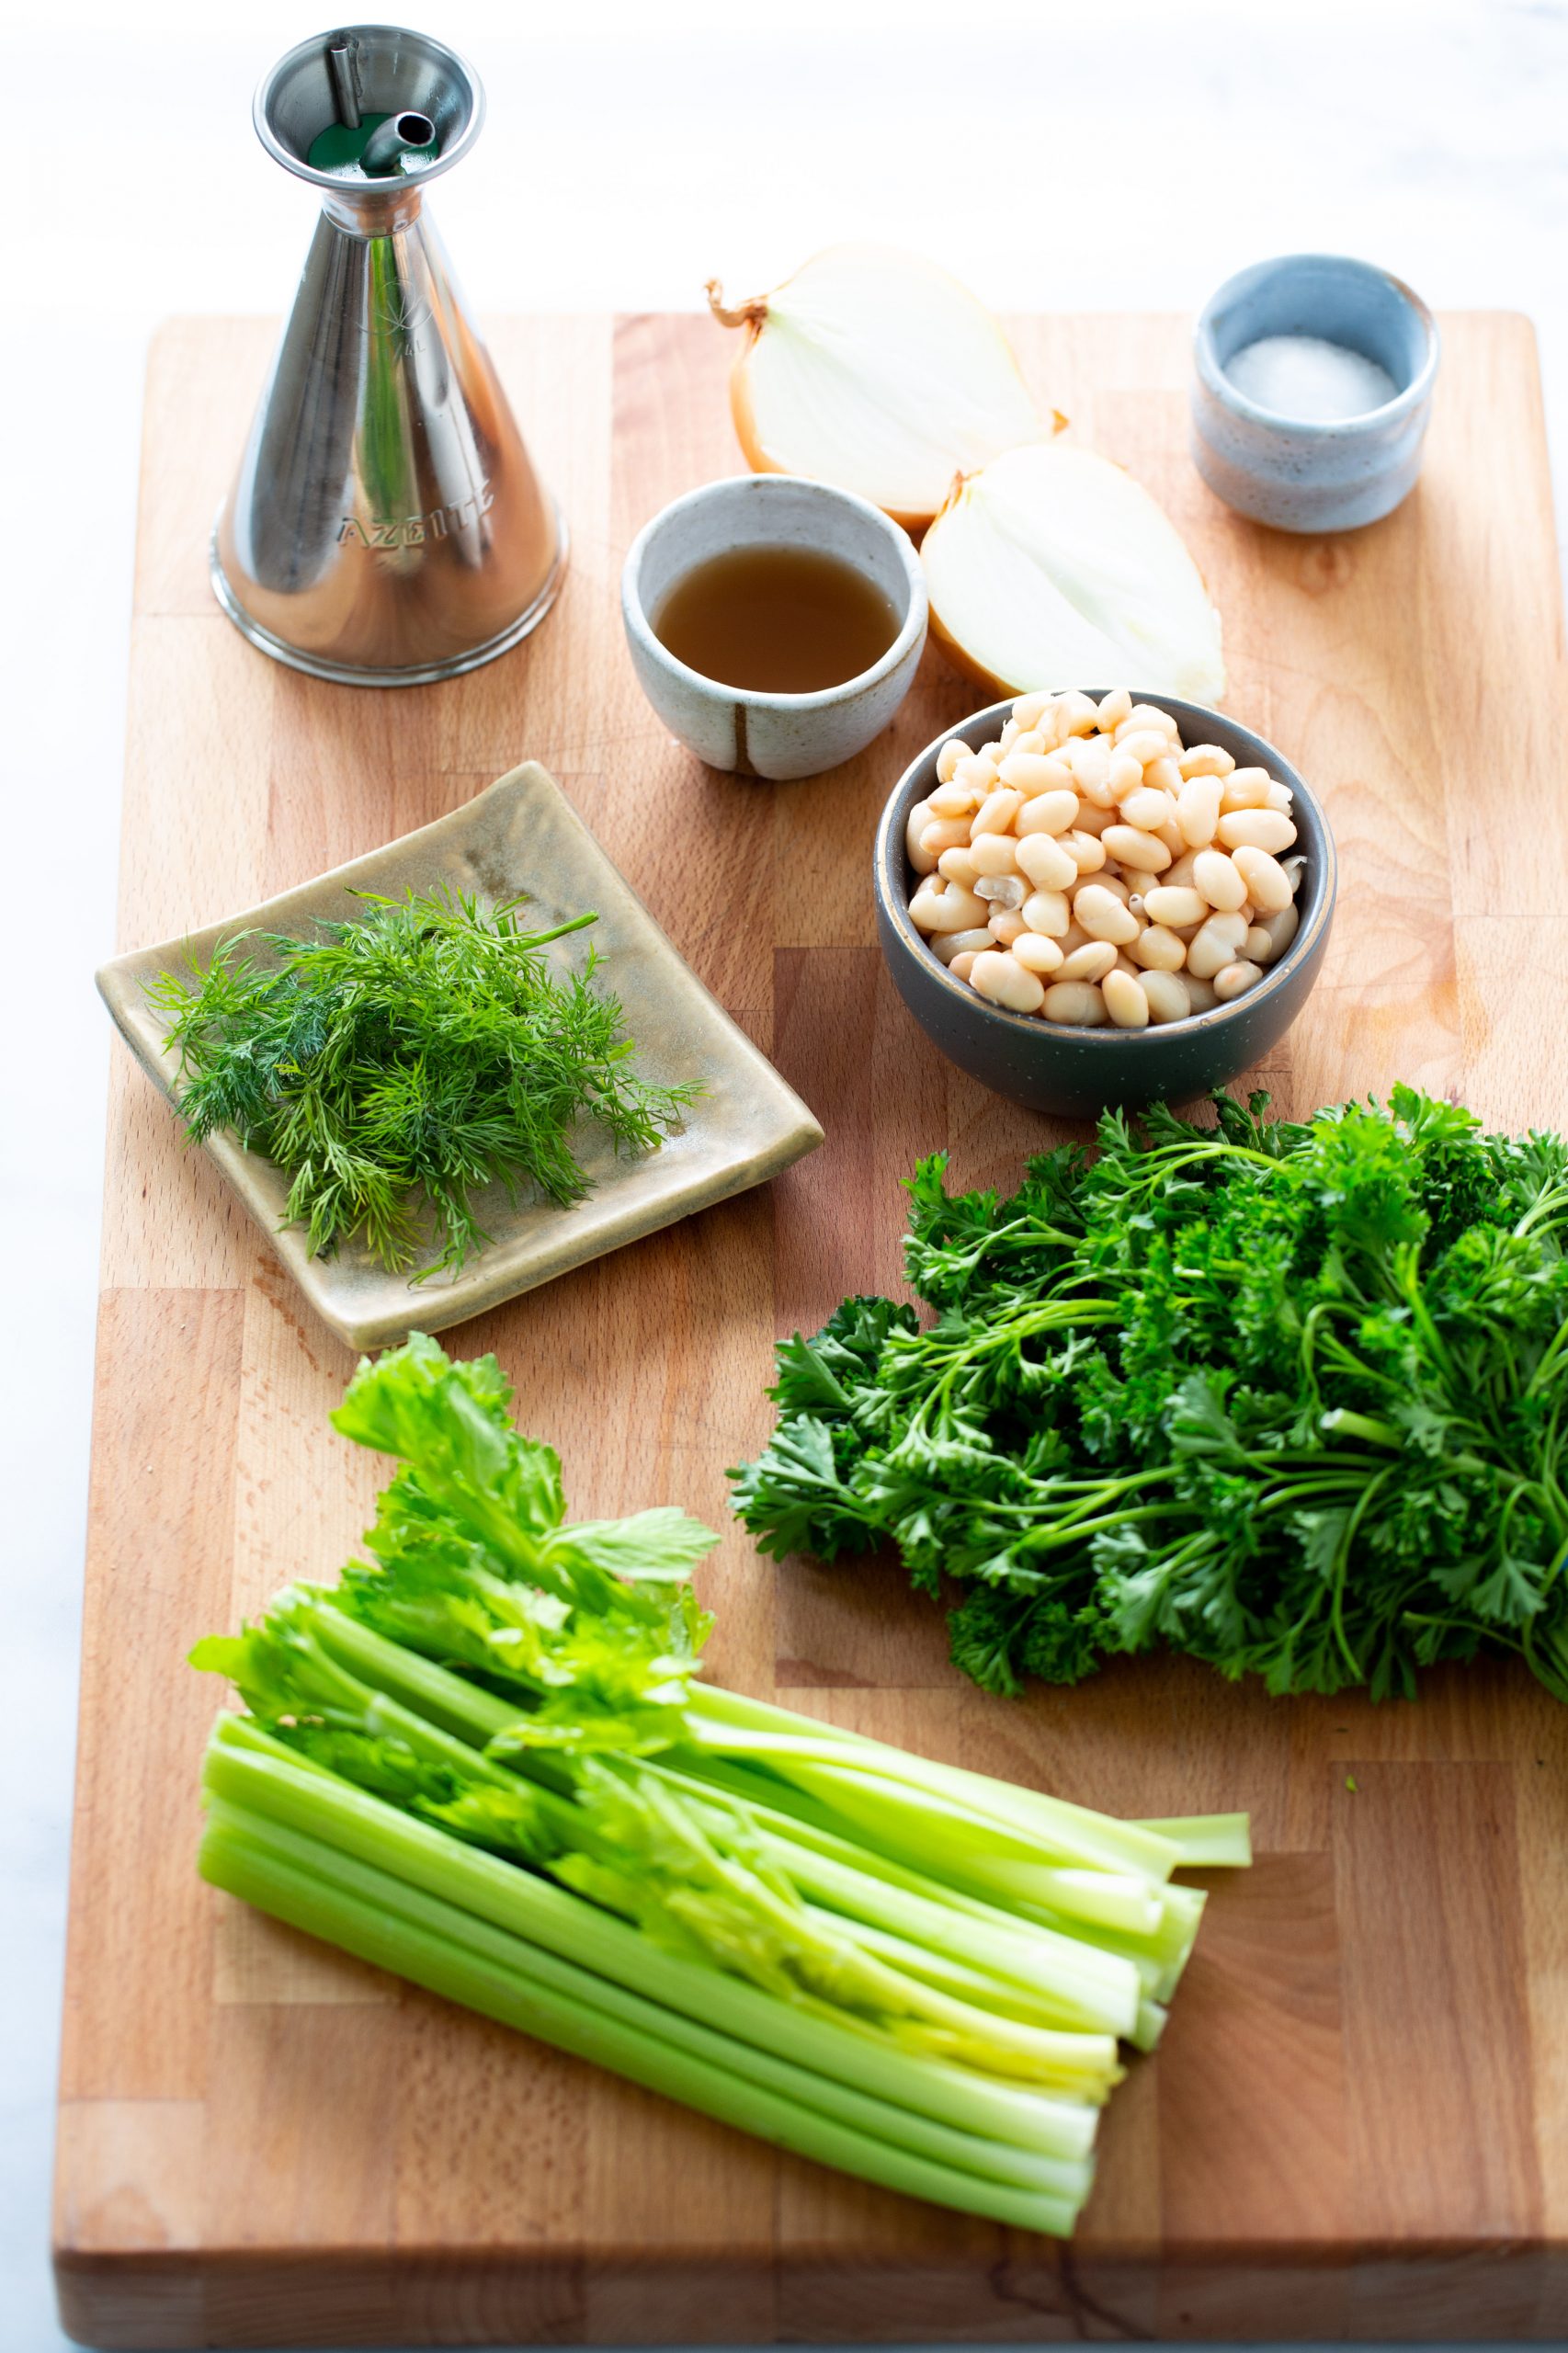 Ingredients to make perfect celery salad